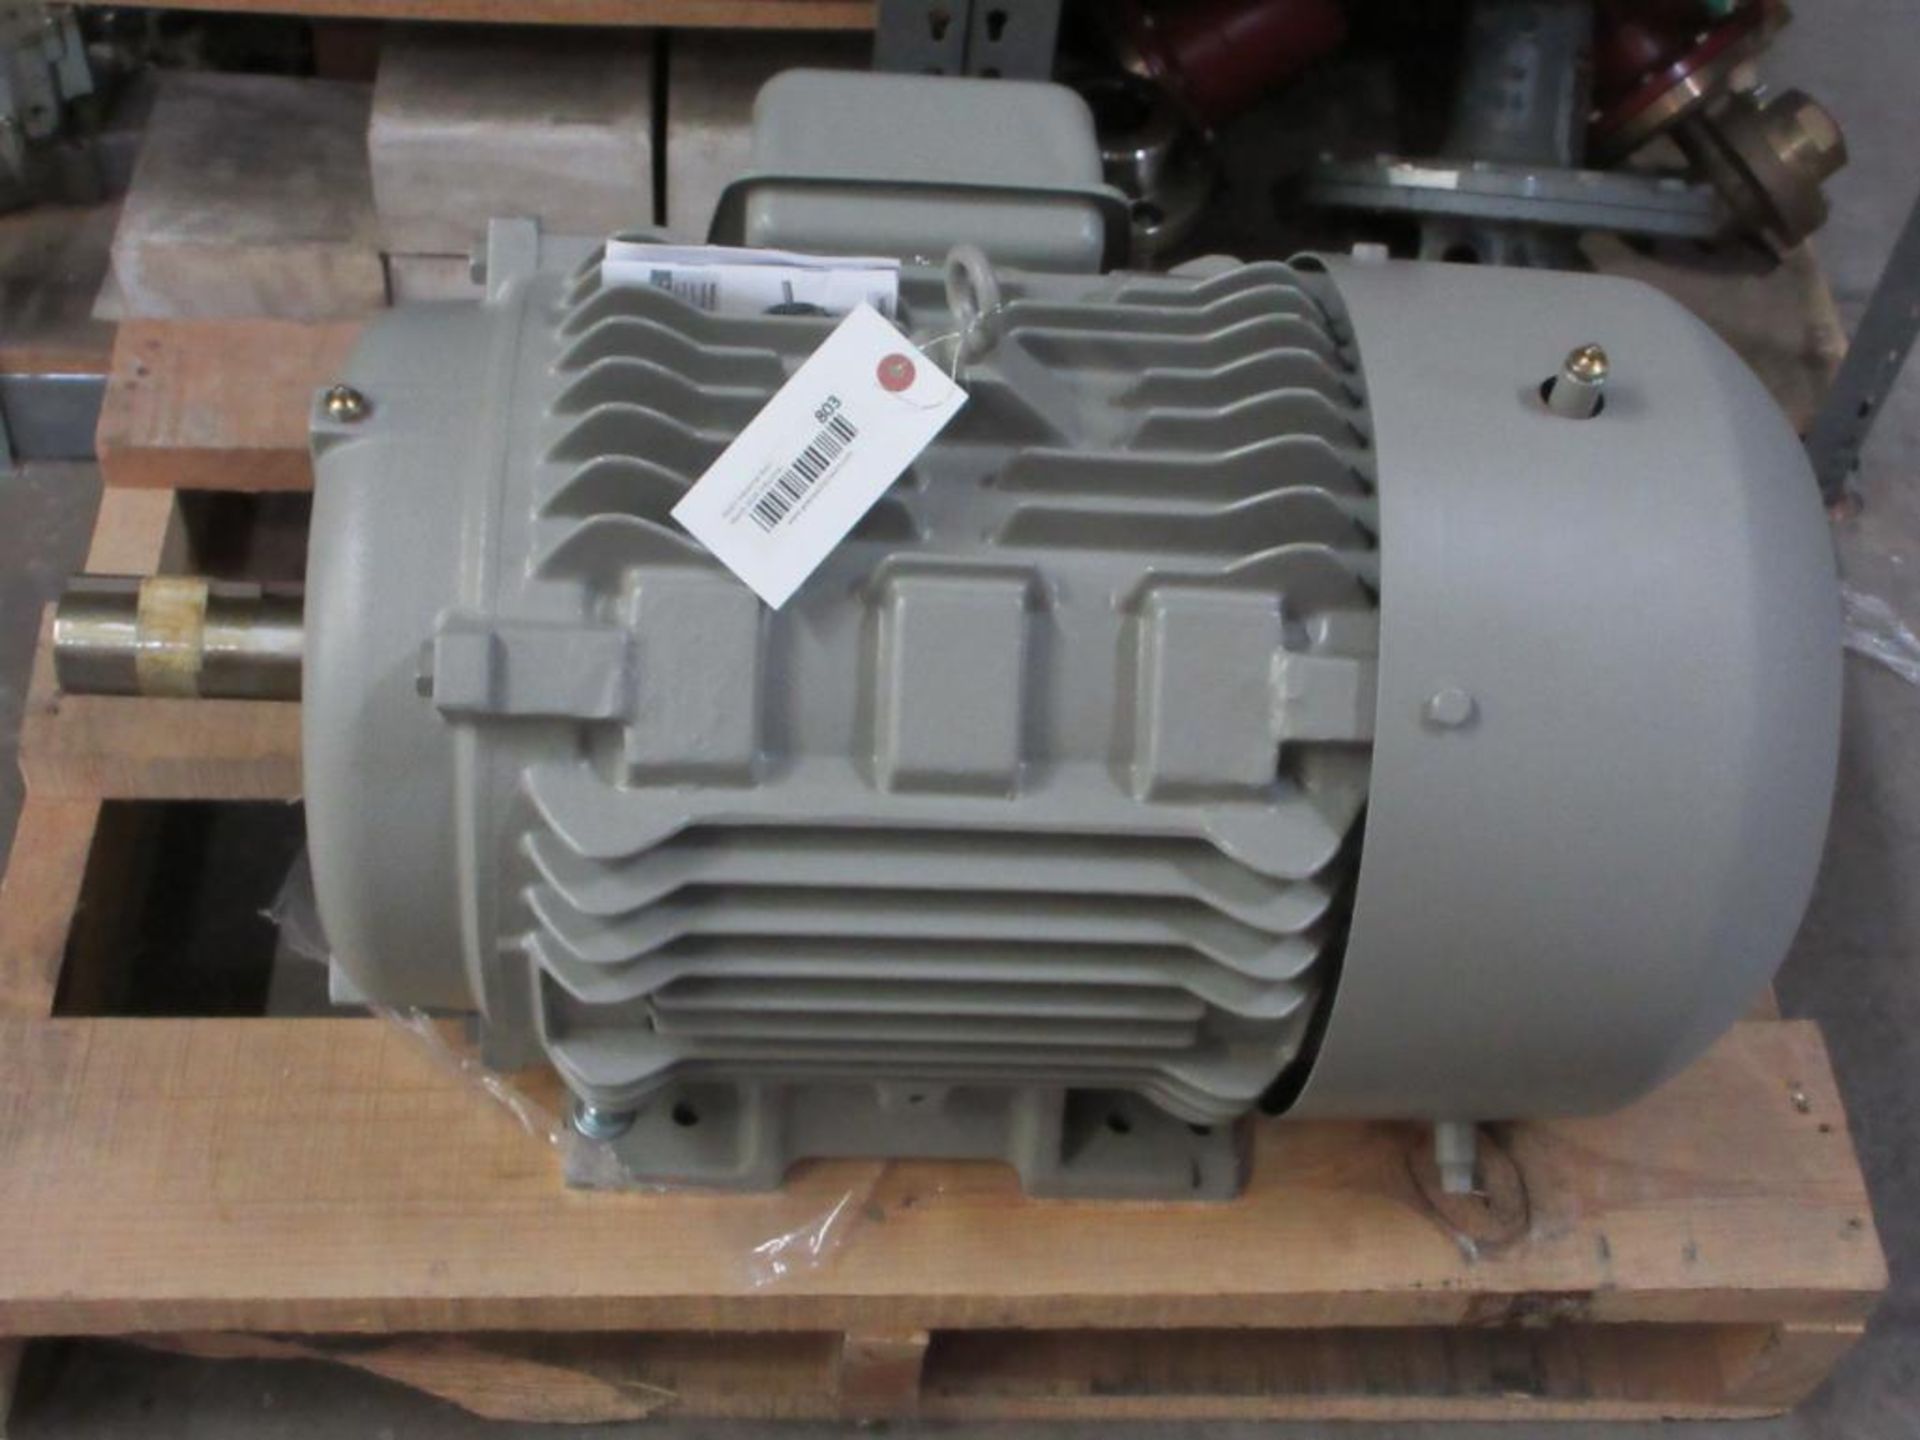 SIEMENS MOTOR 25HP 3 PHASE 1800RPM FRAME 284T P/N ILE22212CB116AA3 (THIS LOT IS FOB CAMARILLO CA) -